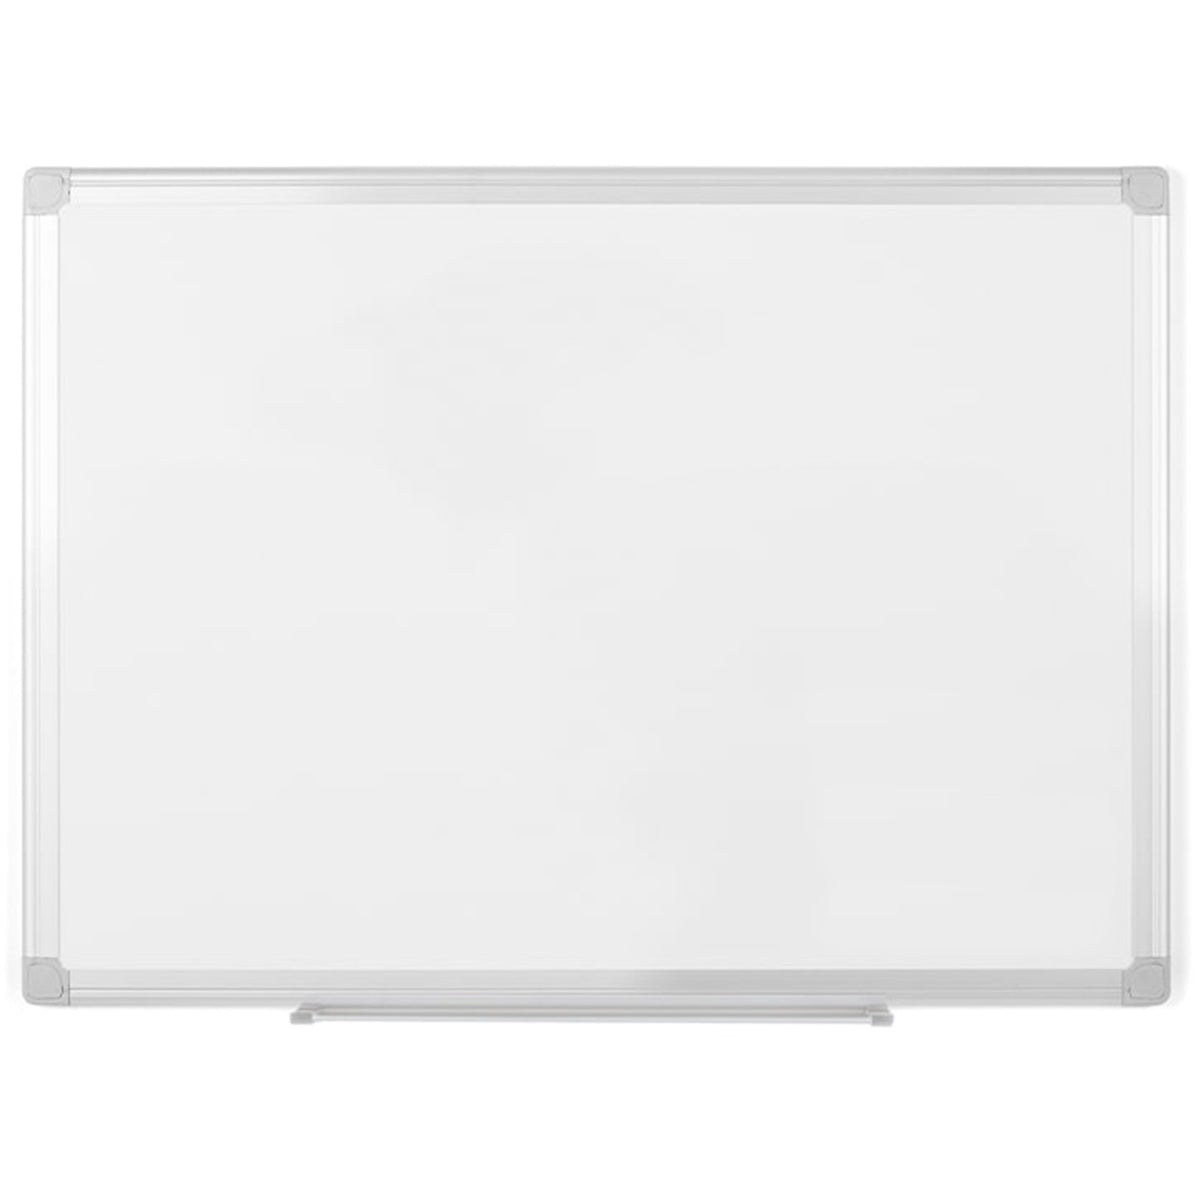 MA2707790 Earth Series Magnetic Laquered Steel Dry Erase Board, 100% Recycled Frame, Snap-On Marker Tray, 48" x 72", Aluminum Frame by MasterVision